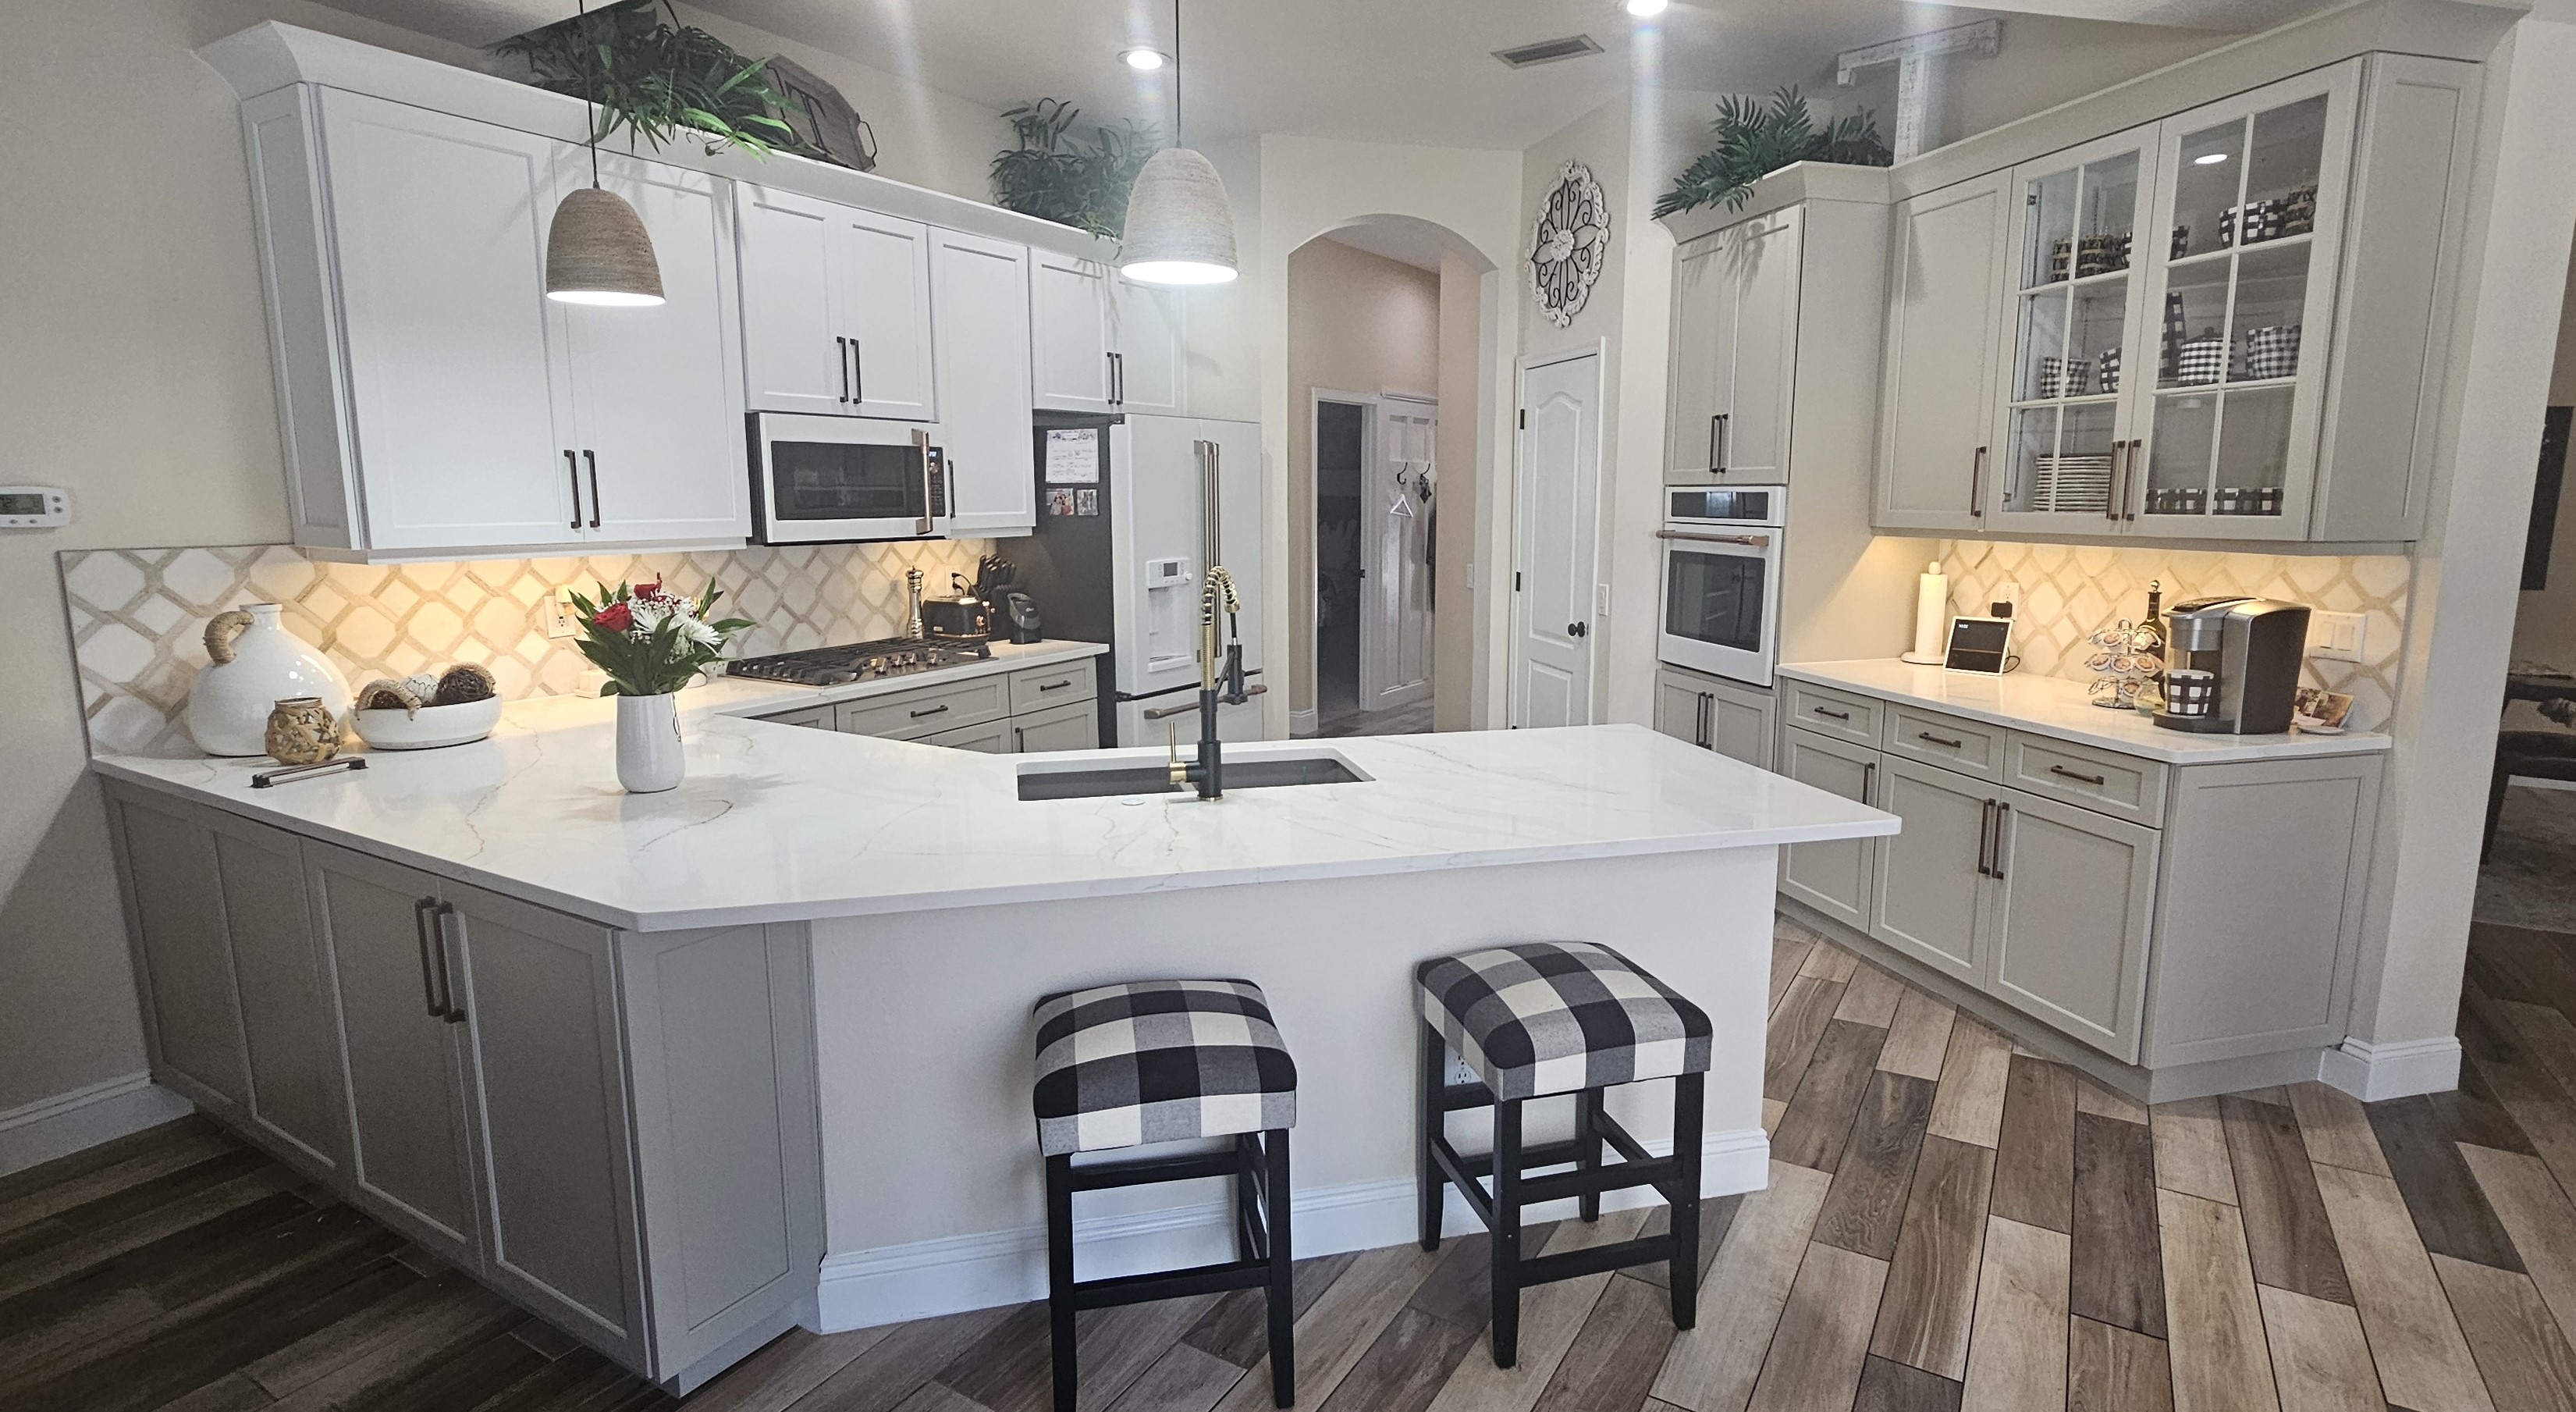 Modern appliances with a high-quality finish, granite worktops, and sleek white kitchen cabinets in Pinellas Park.